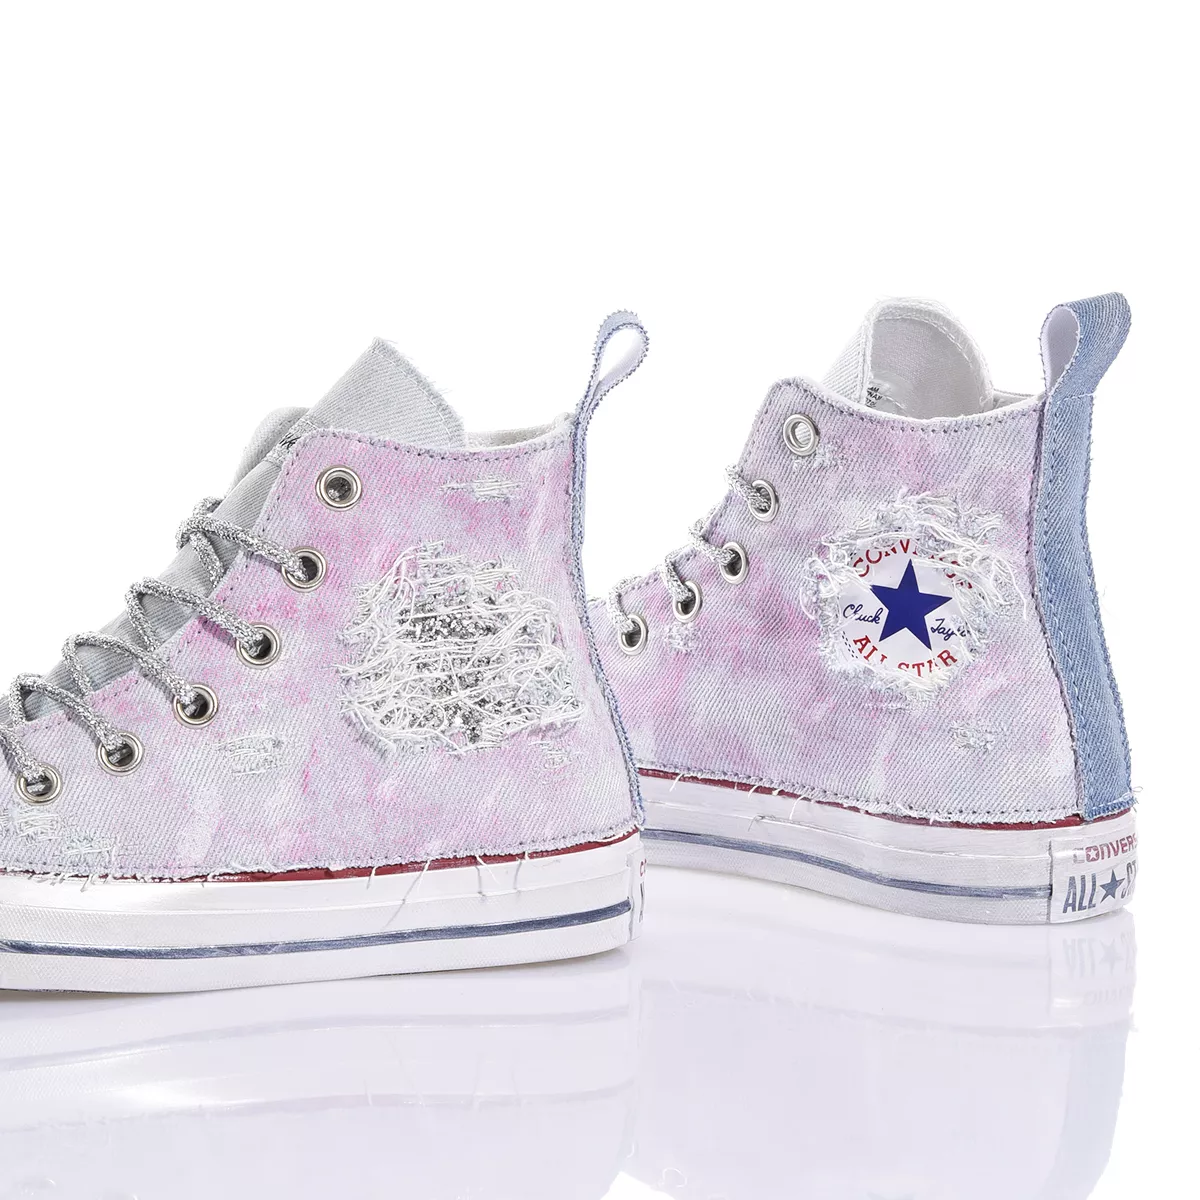 Converse Denim Glitter Chuck Taylor Hi Washed-out, Glitter, Special